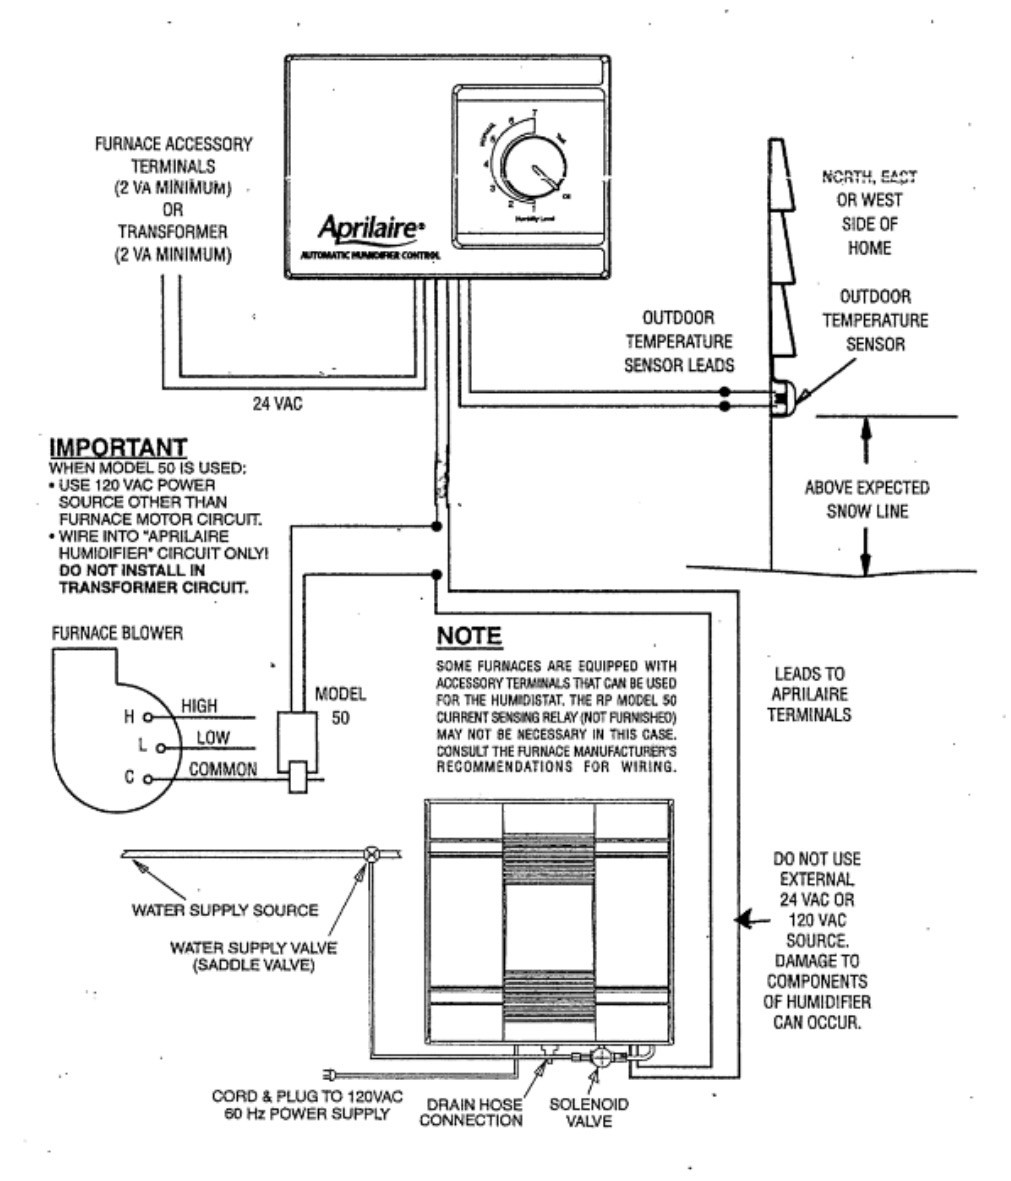 Heating Wiring Aprilaire 700 Humidifier To York TG9 Furnace 19 Wiring Diagram